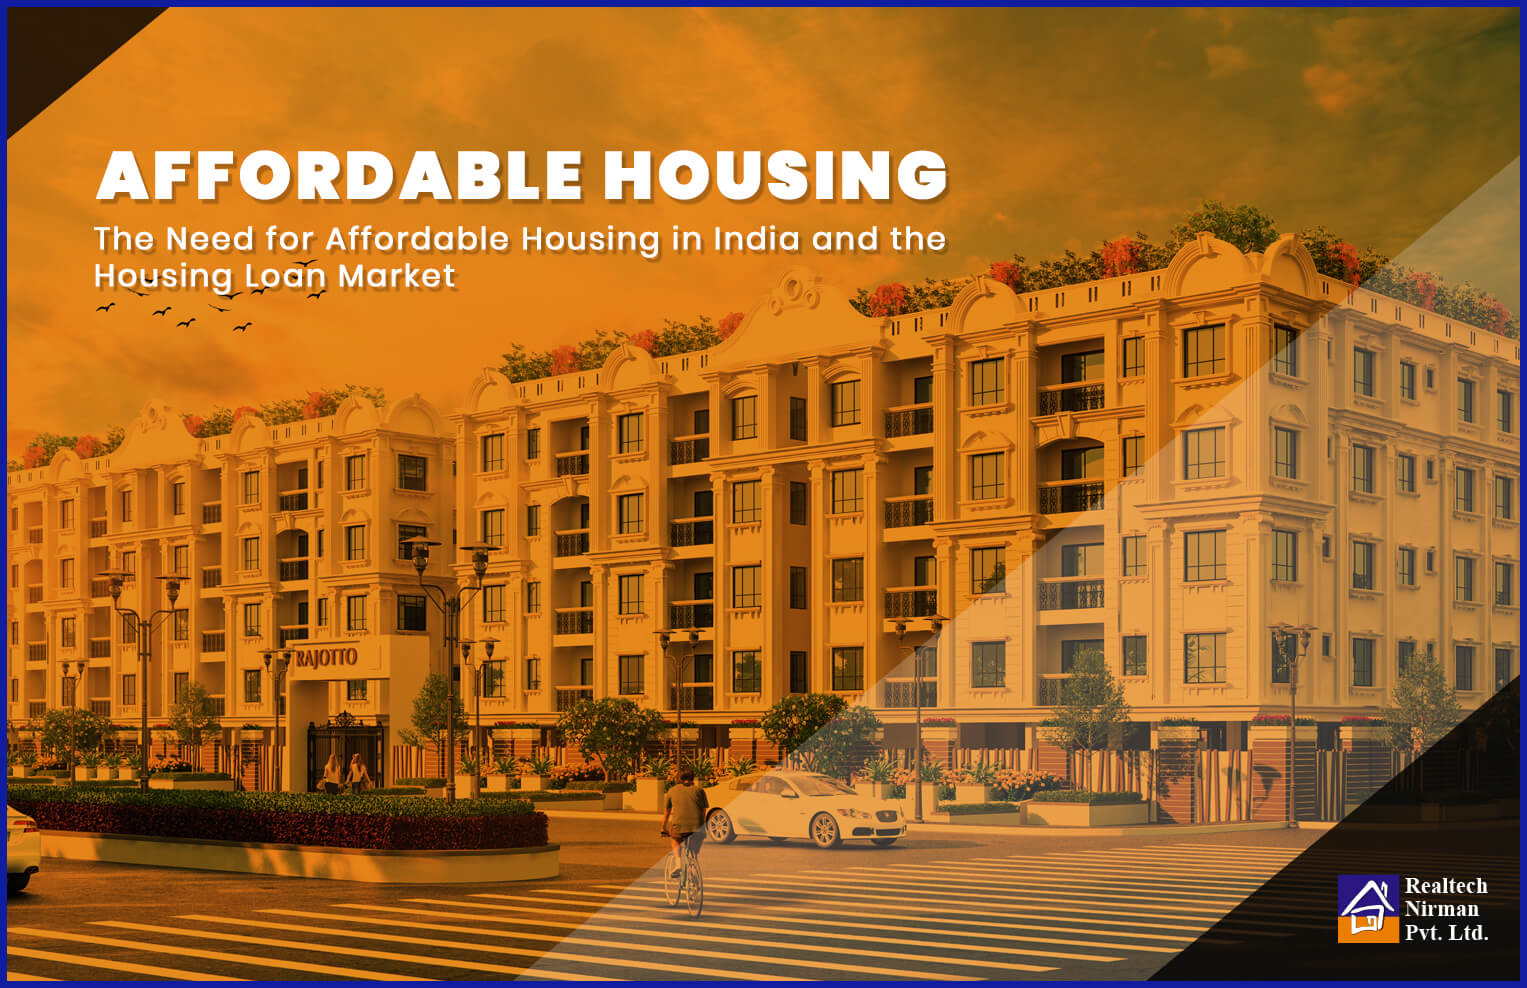 The Need for Affordable Housing in India and the Housing Loan Market